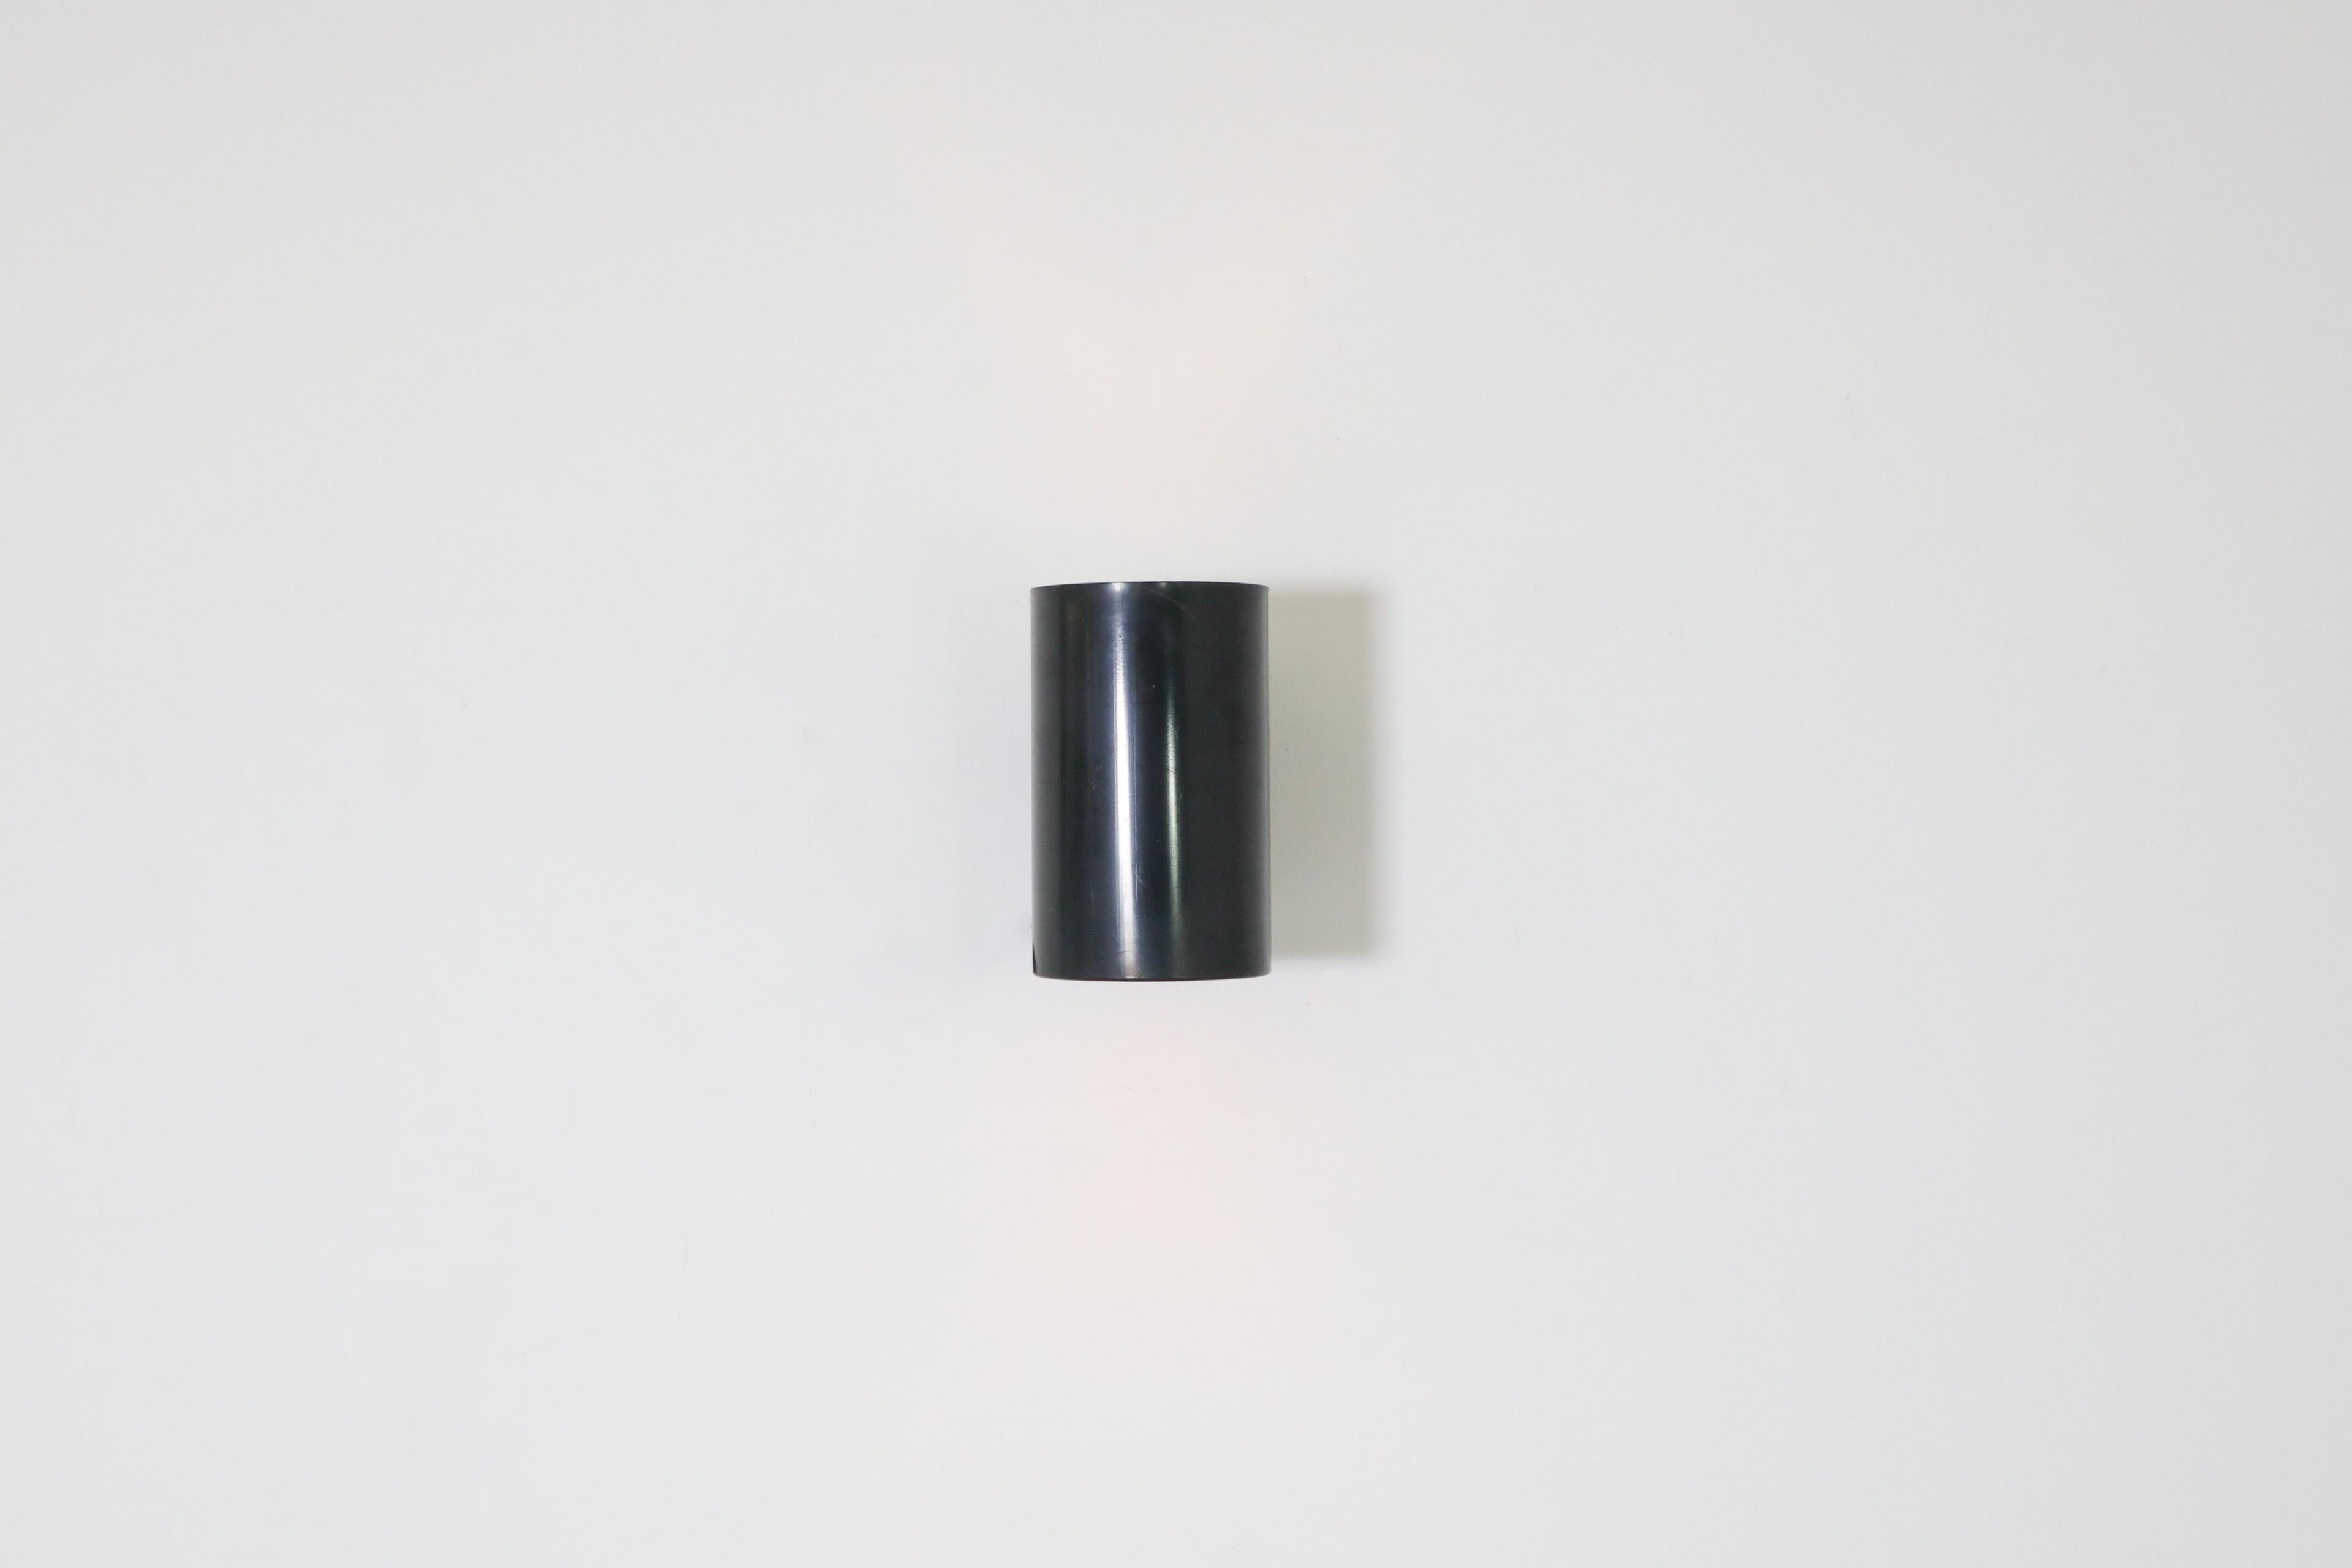 Dutch Mid-Century, Philips manufactured, black enameled metal cylinder wall sconces. In original condition with some visible wear including scratching and possible denting. Wear may vary from lamp to lamp and is consistent with age and use. Sold